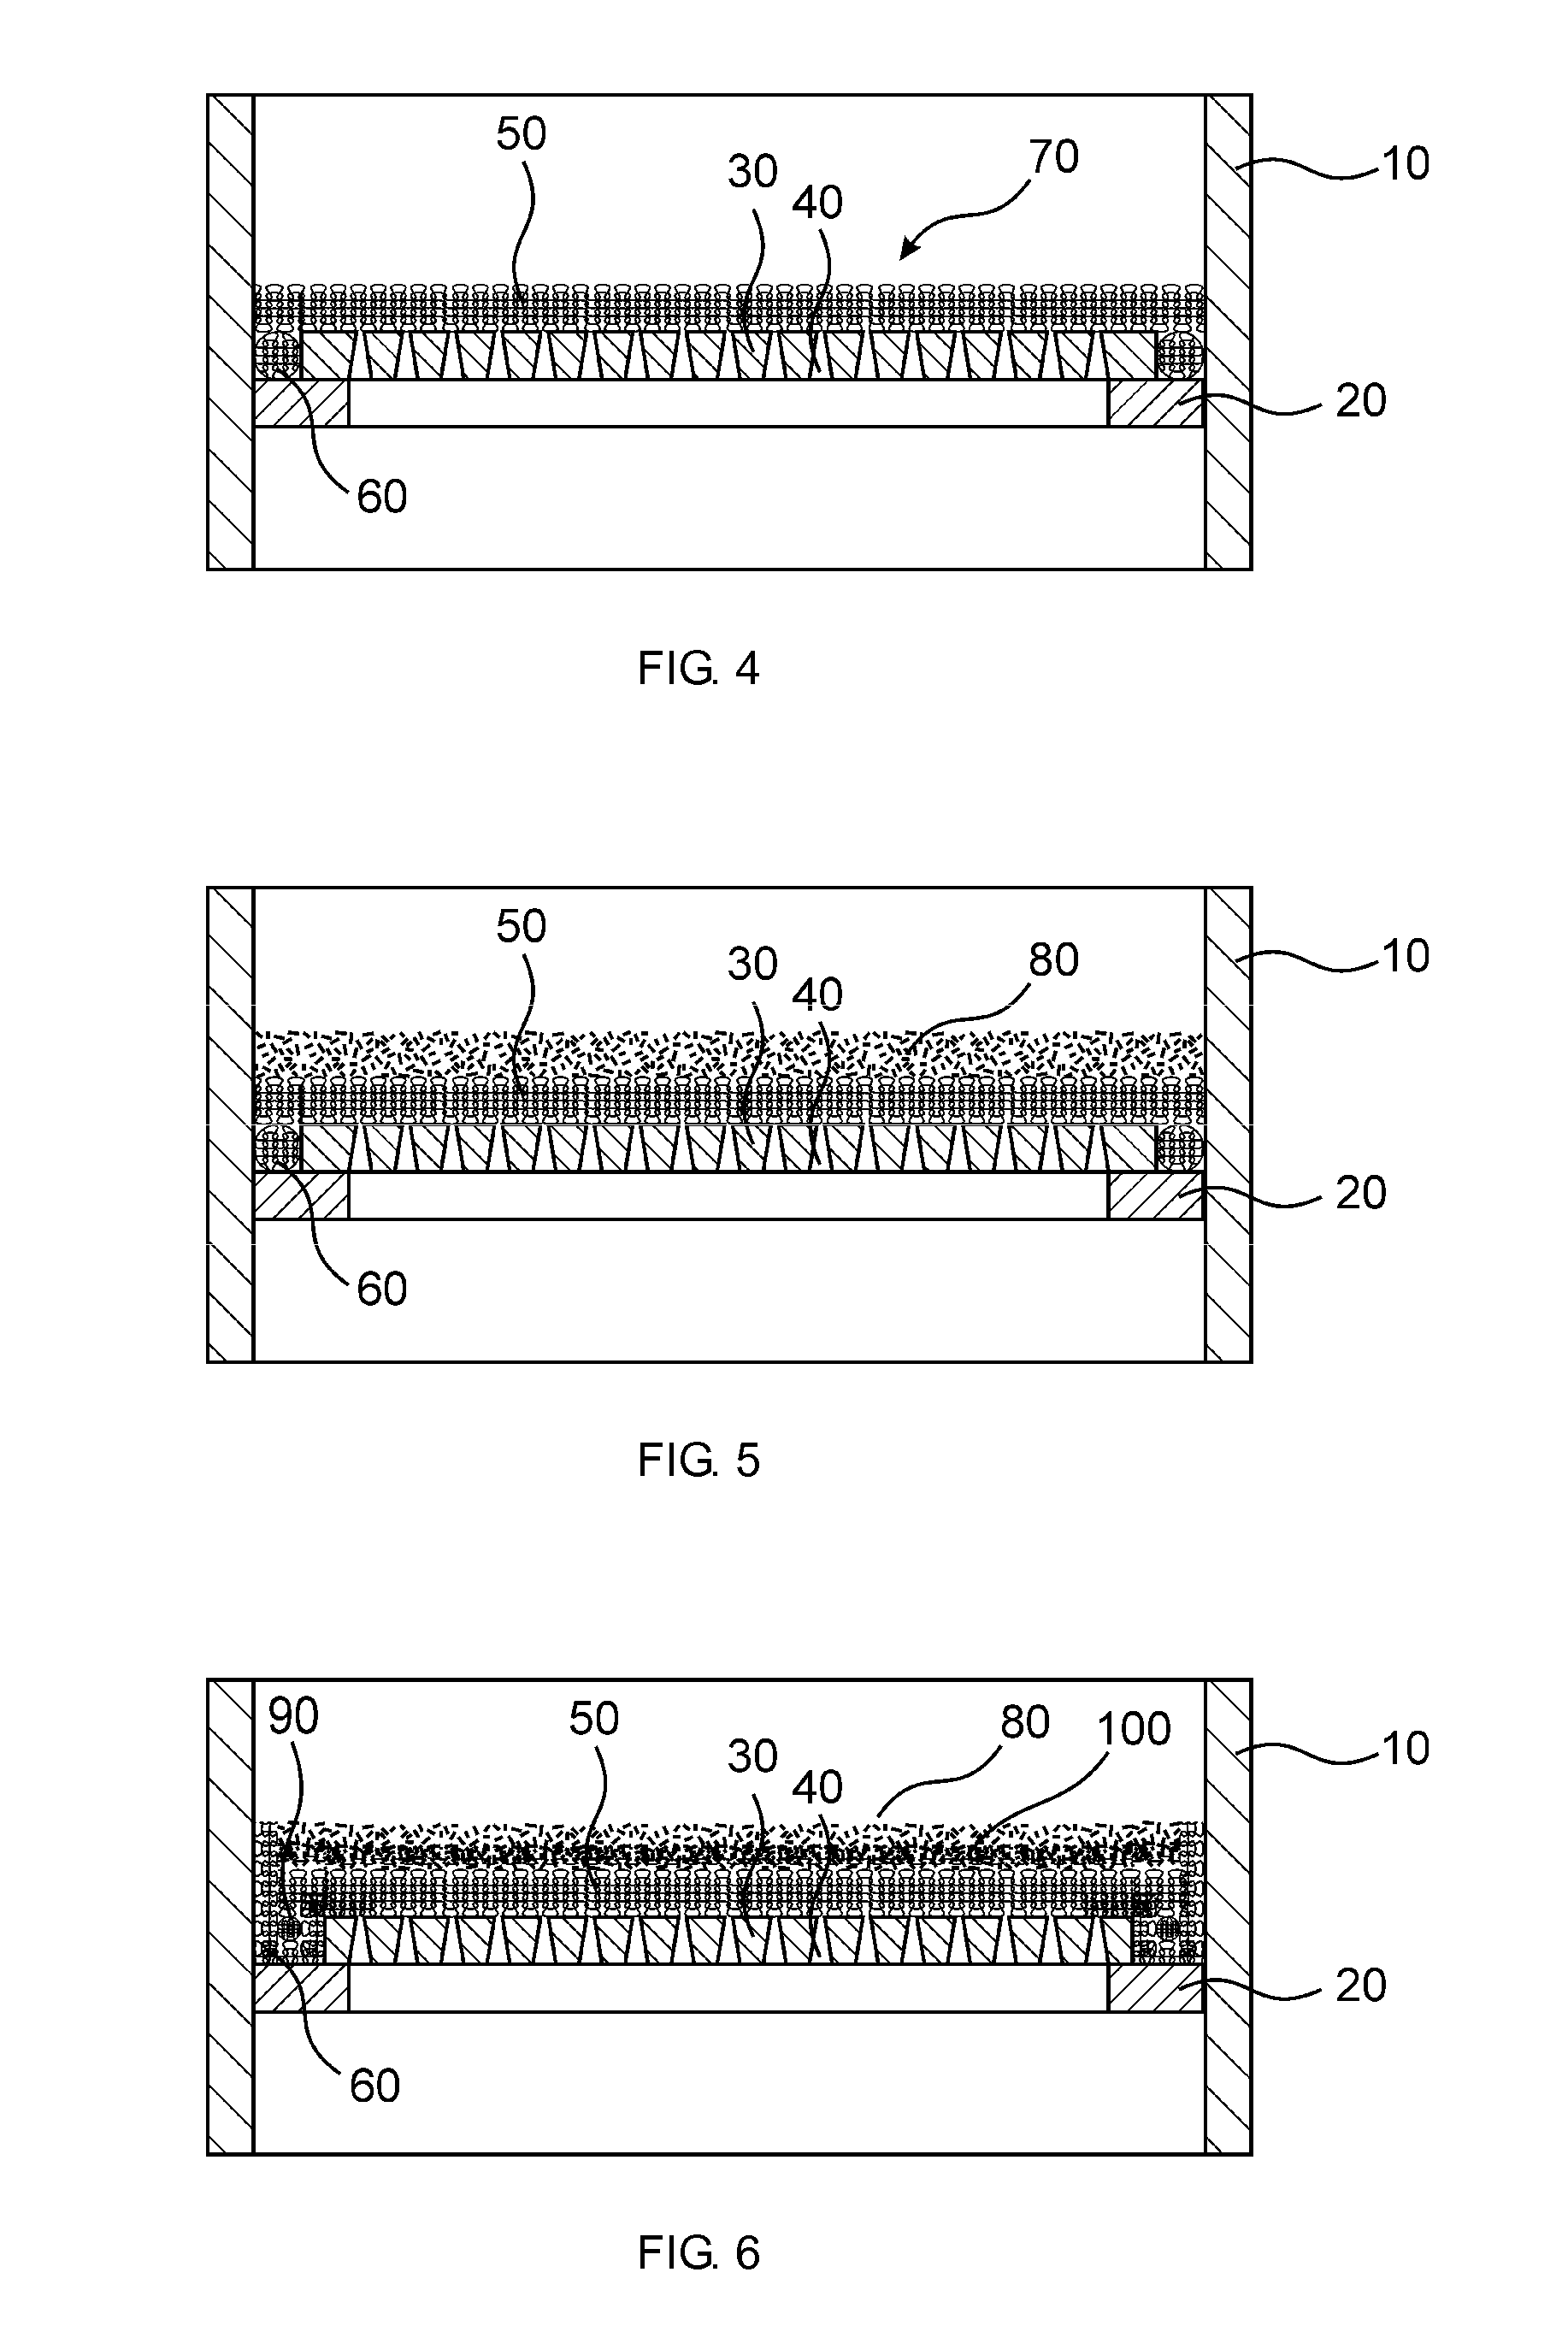 Chemical reactor with knitted wire mesh fabric as a holding device for particles